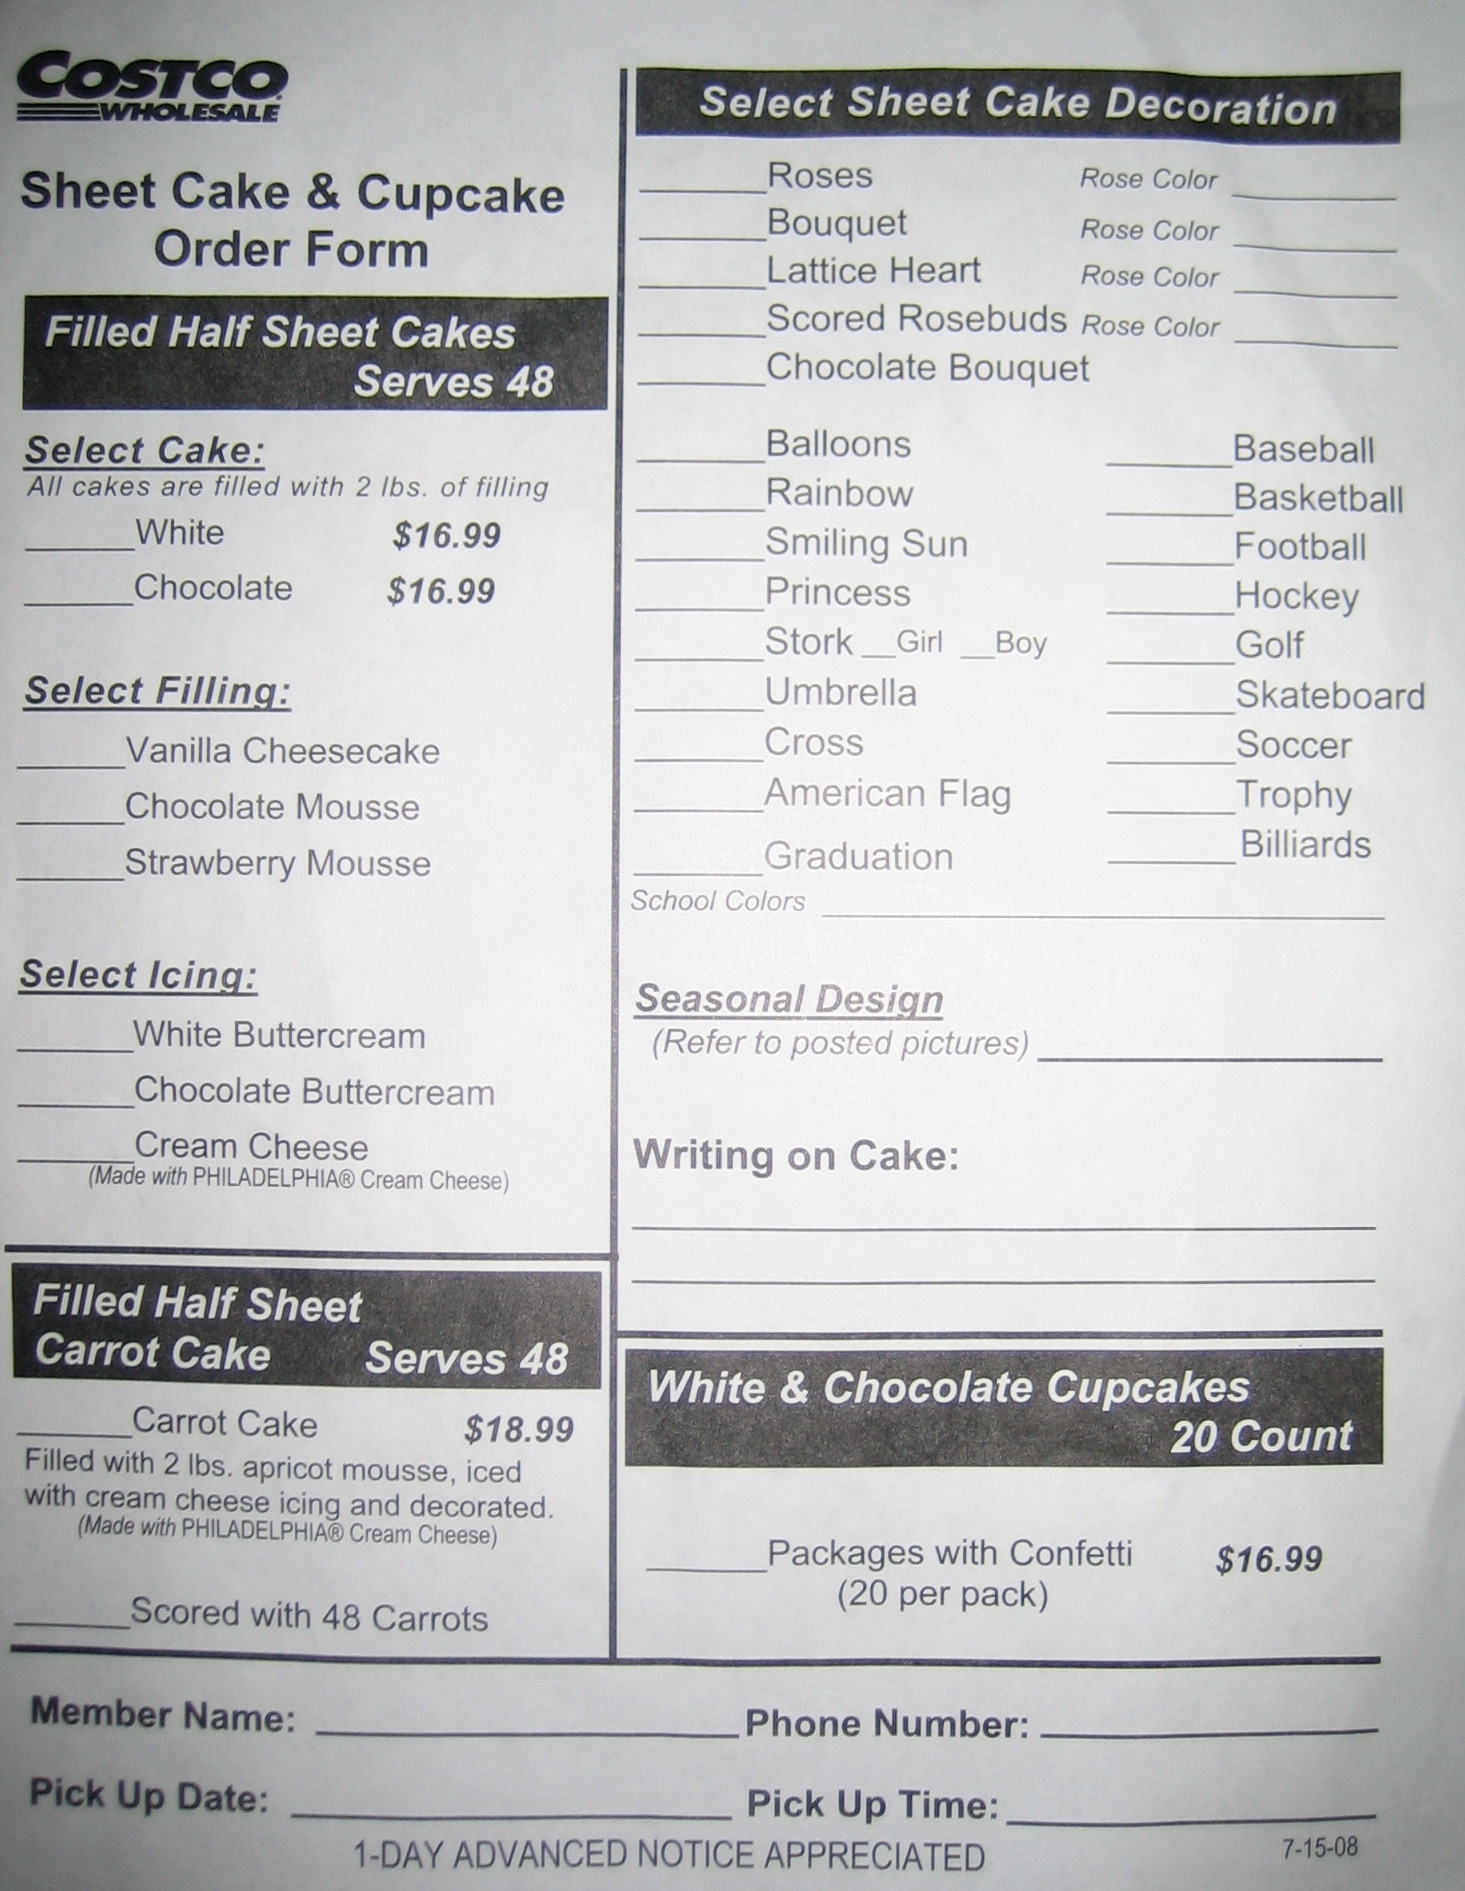 Costco Sheet Cake Prices
 How much do costco bakery cheesecakes cost